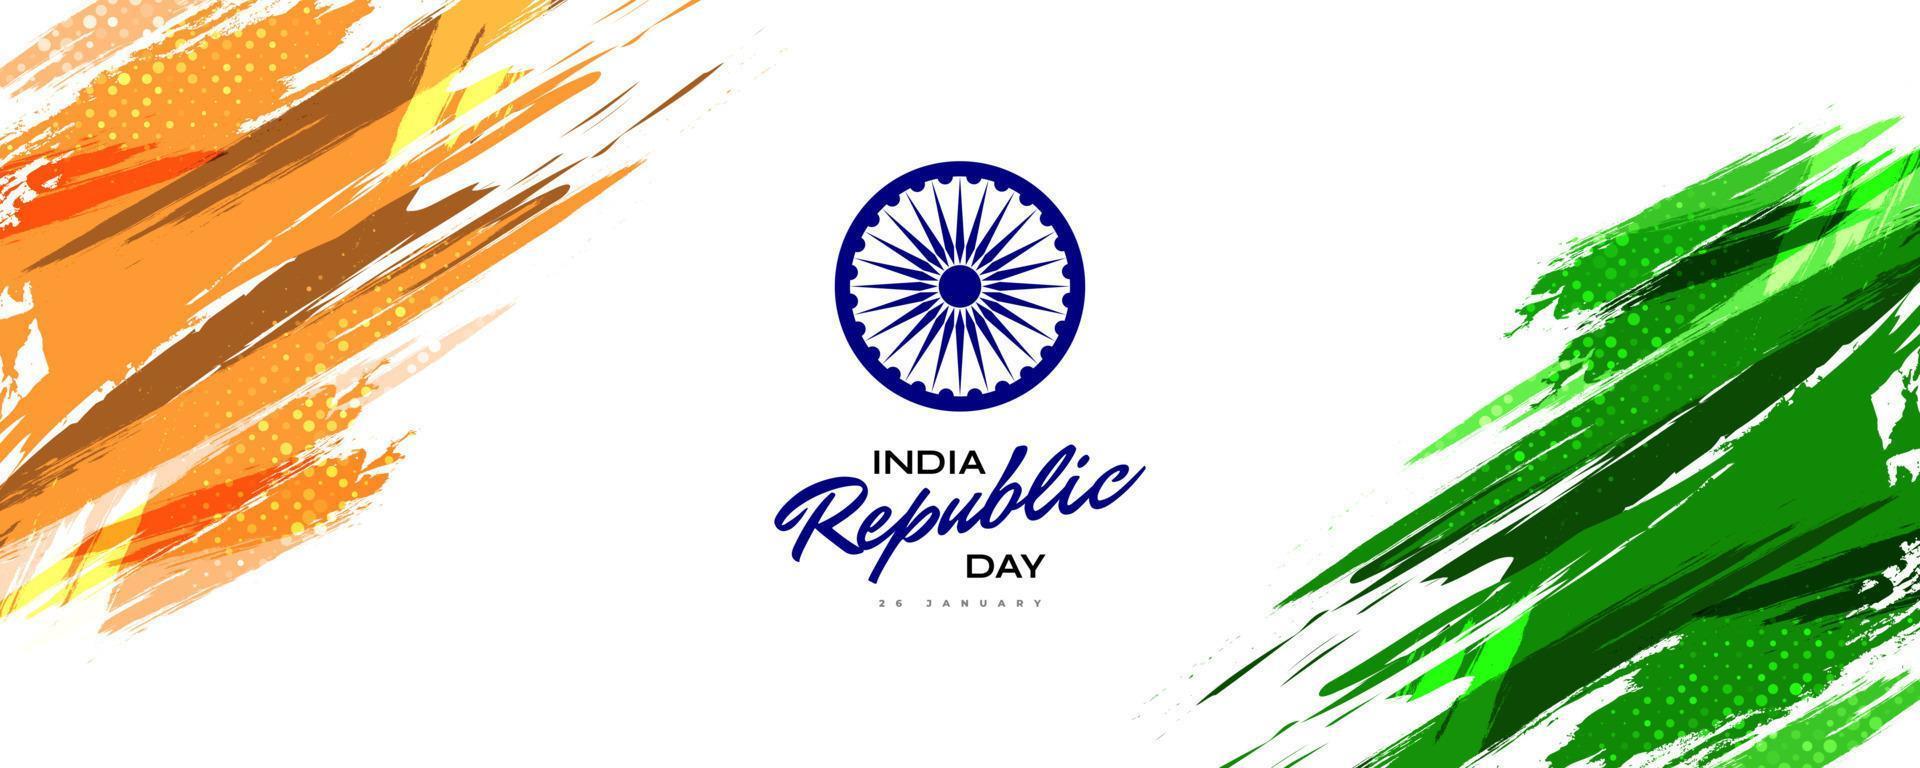 26th January Happy Republic Day of India. Indian Tricolor Flag Illustration in Brush Style vector